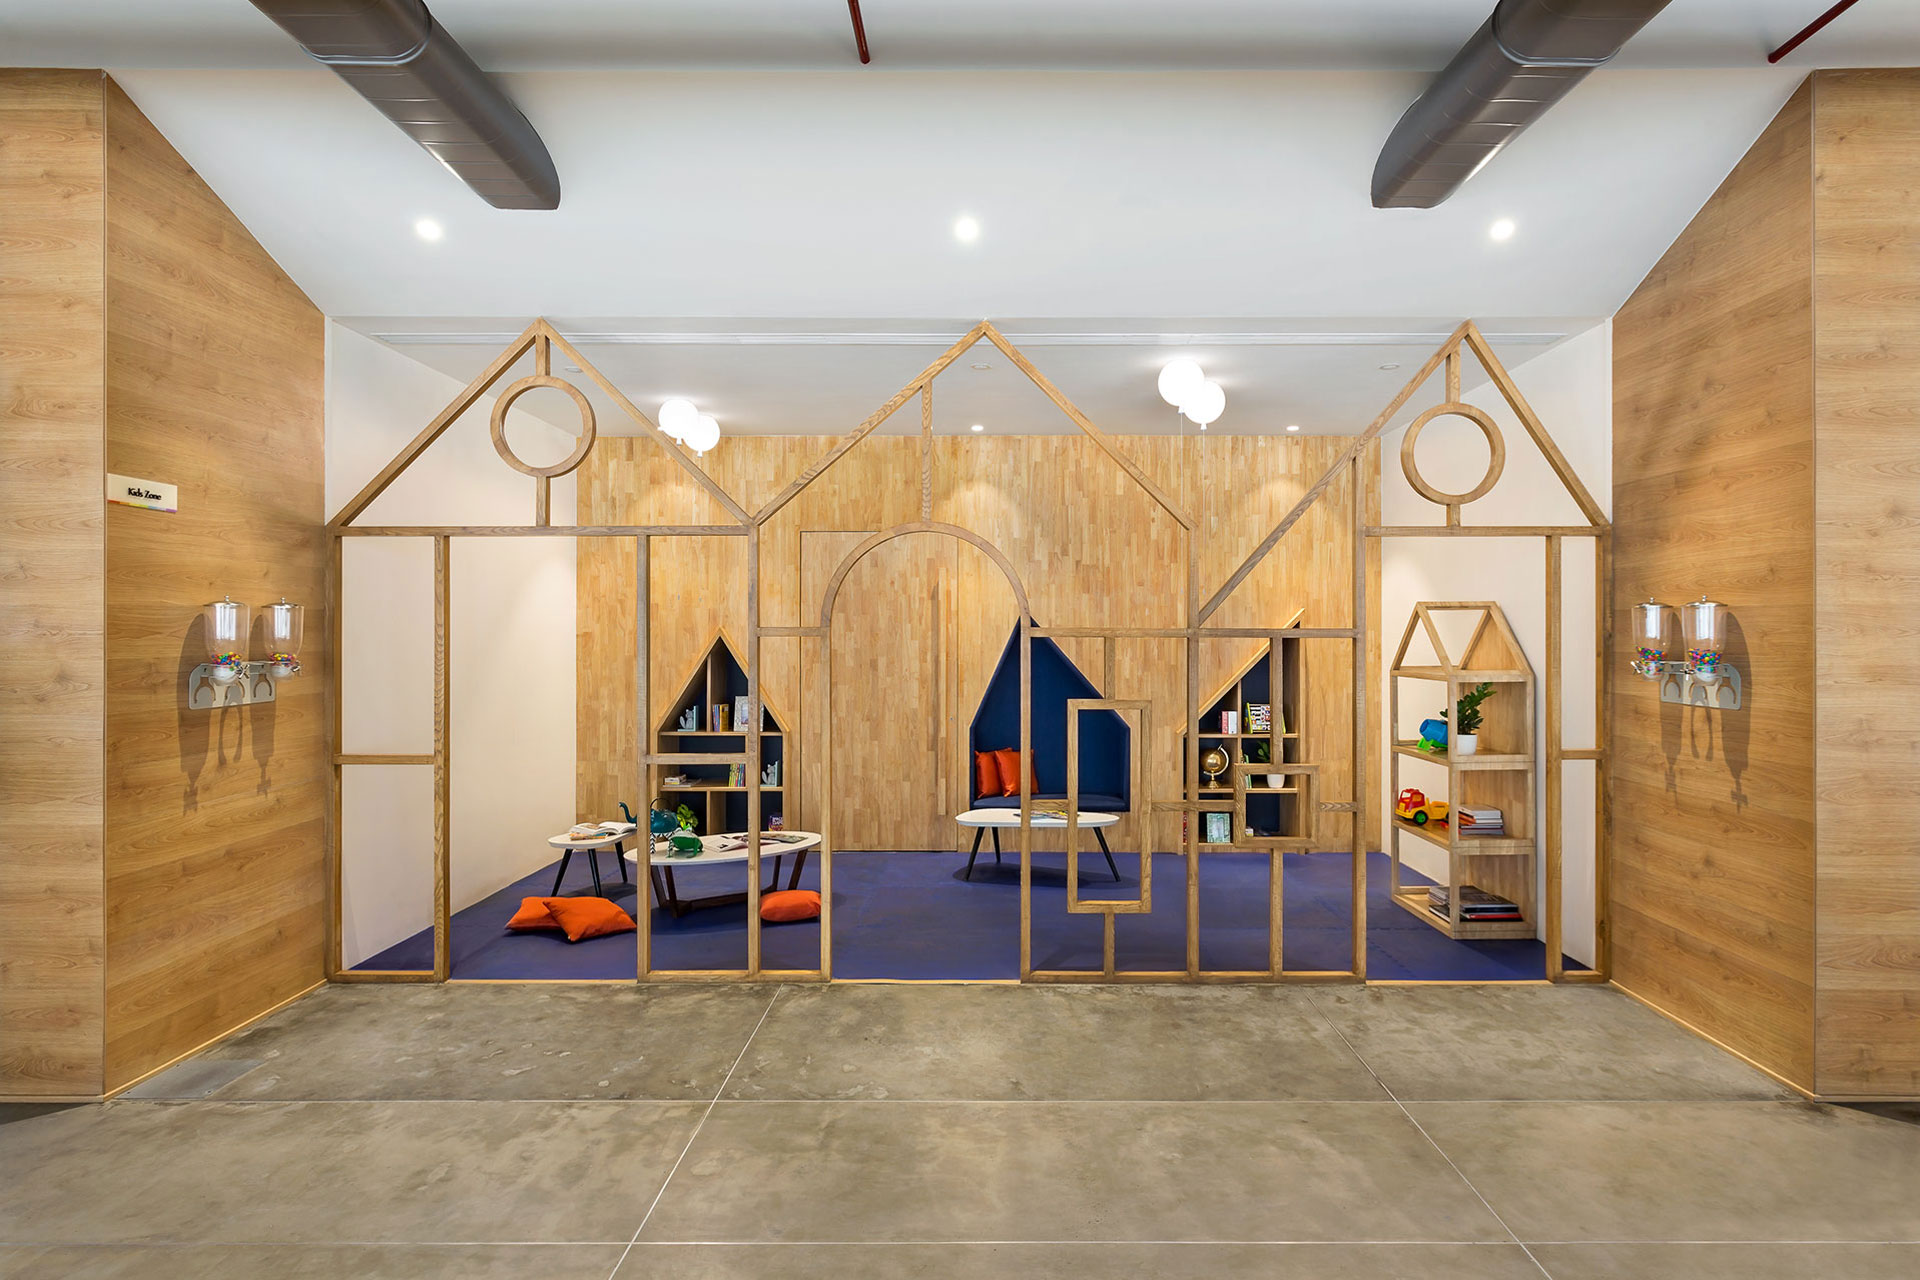 Kids’ play area set within two flanking RC walls clad in wood has a playful built-in niche set in the back storage wall with smaller niches created as seating and book shelves. The blue colored floor visually creates a lively setting for the play area.